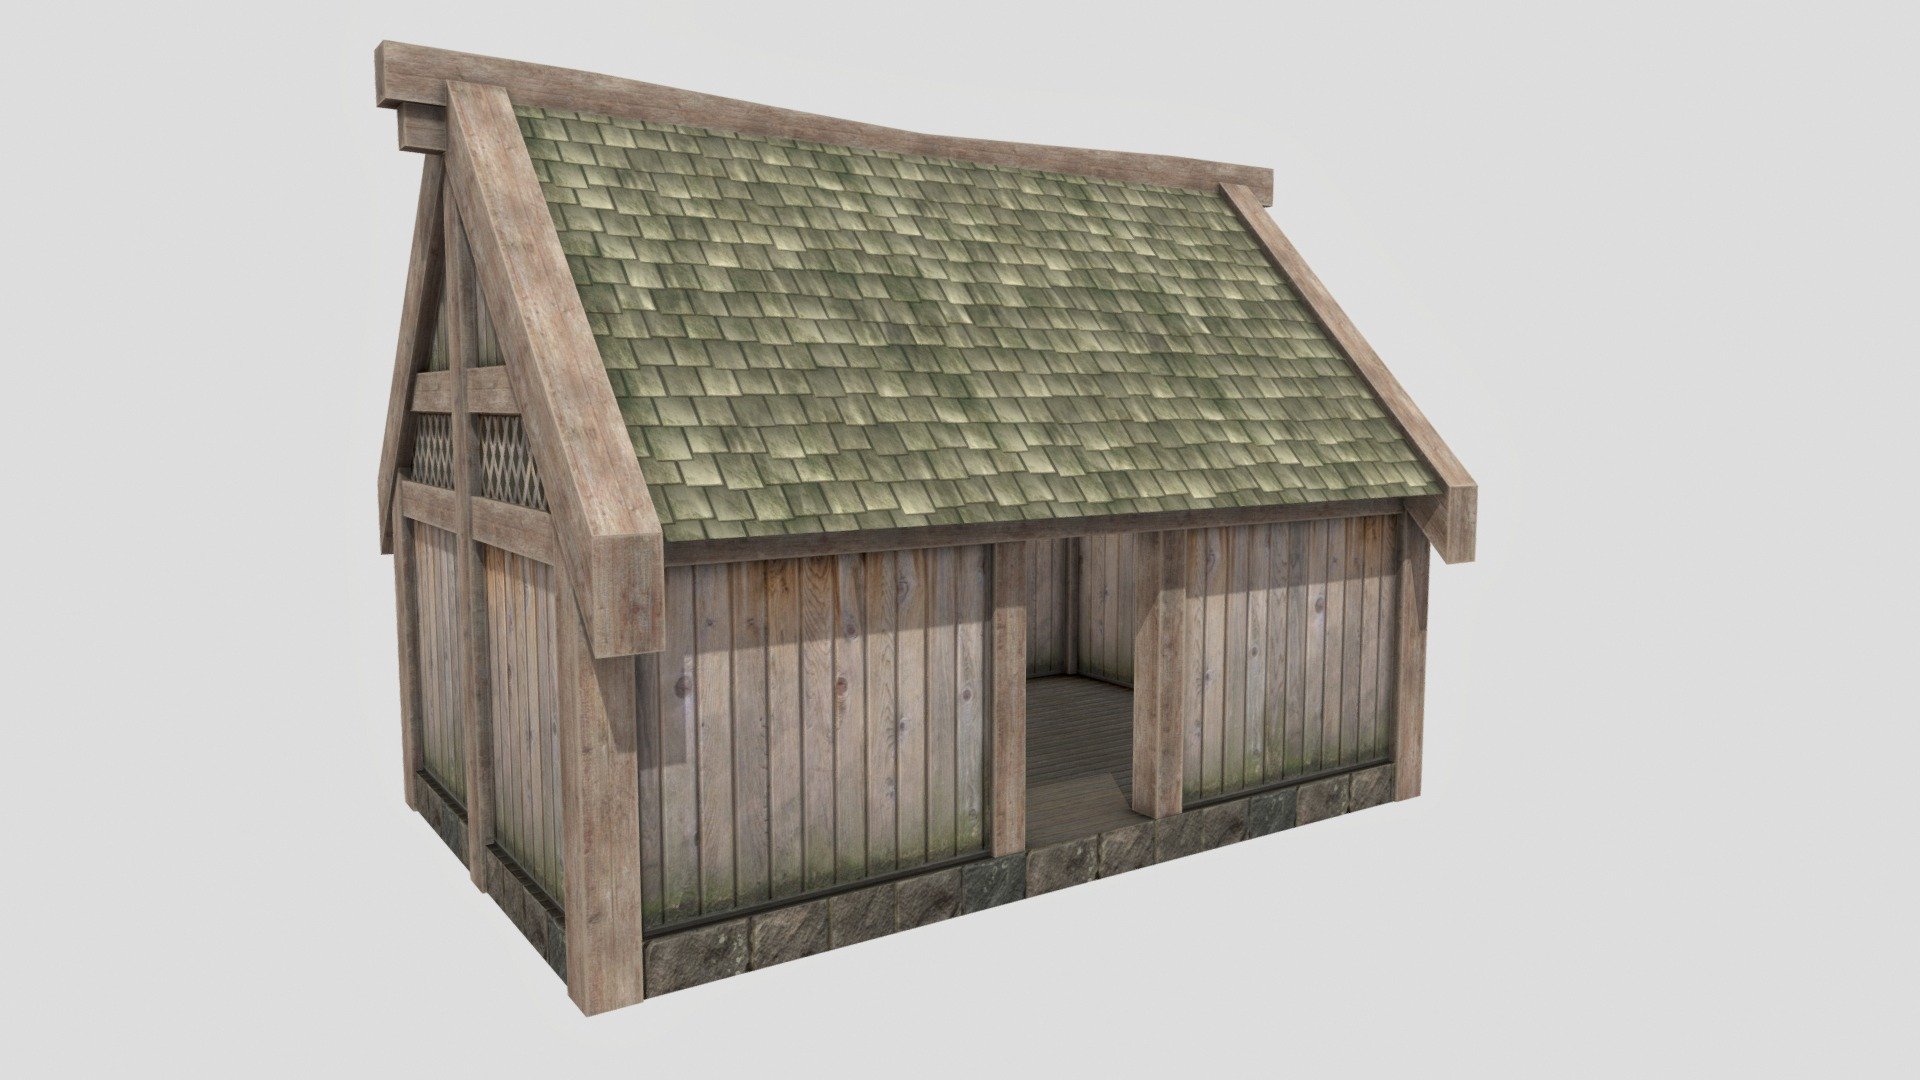 A small medieval style house with an enterable interior. Includes two materials and eight total texture maps. Works great in any modern game engine or for rendering purposes. File formats included: fbx, obj, mtl, blend, dae and gltf.

Textures are in 4096x4096 resolution:




-Diffuse/Base color

-Normal map

-Ambient Occlusion

-Roughness

Textures were created in, and exported from, Substance Painter.
Model created with, and native to, Blender 2.8.

For any help or inquiries please message me directly on my email: howardcoates95@gmail.com - Medieval House - Buy Royalty Free 3D model by HowardCoates 3d model